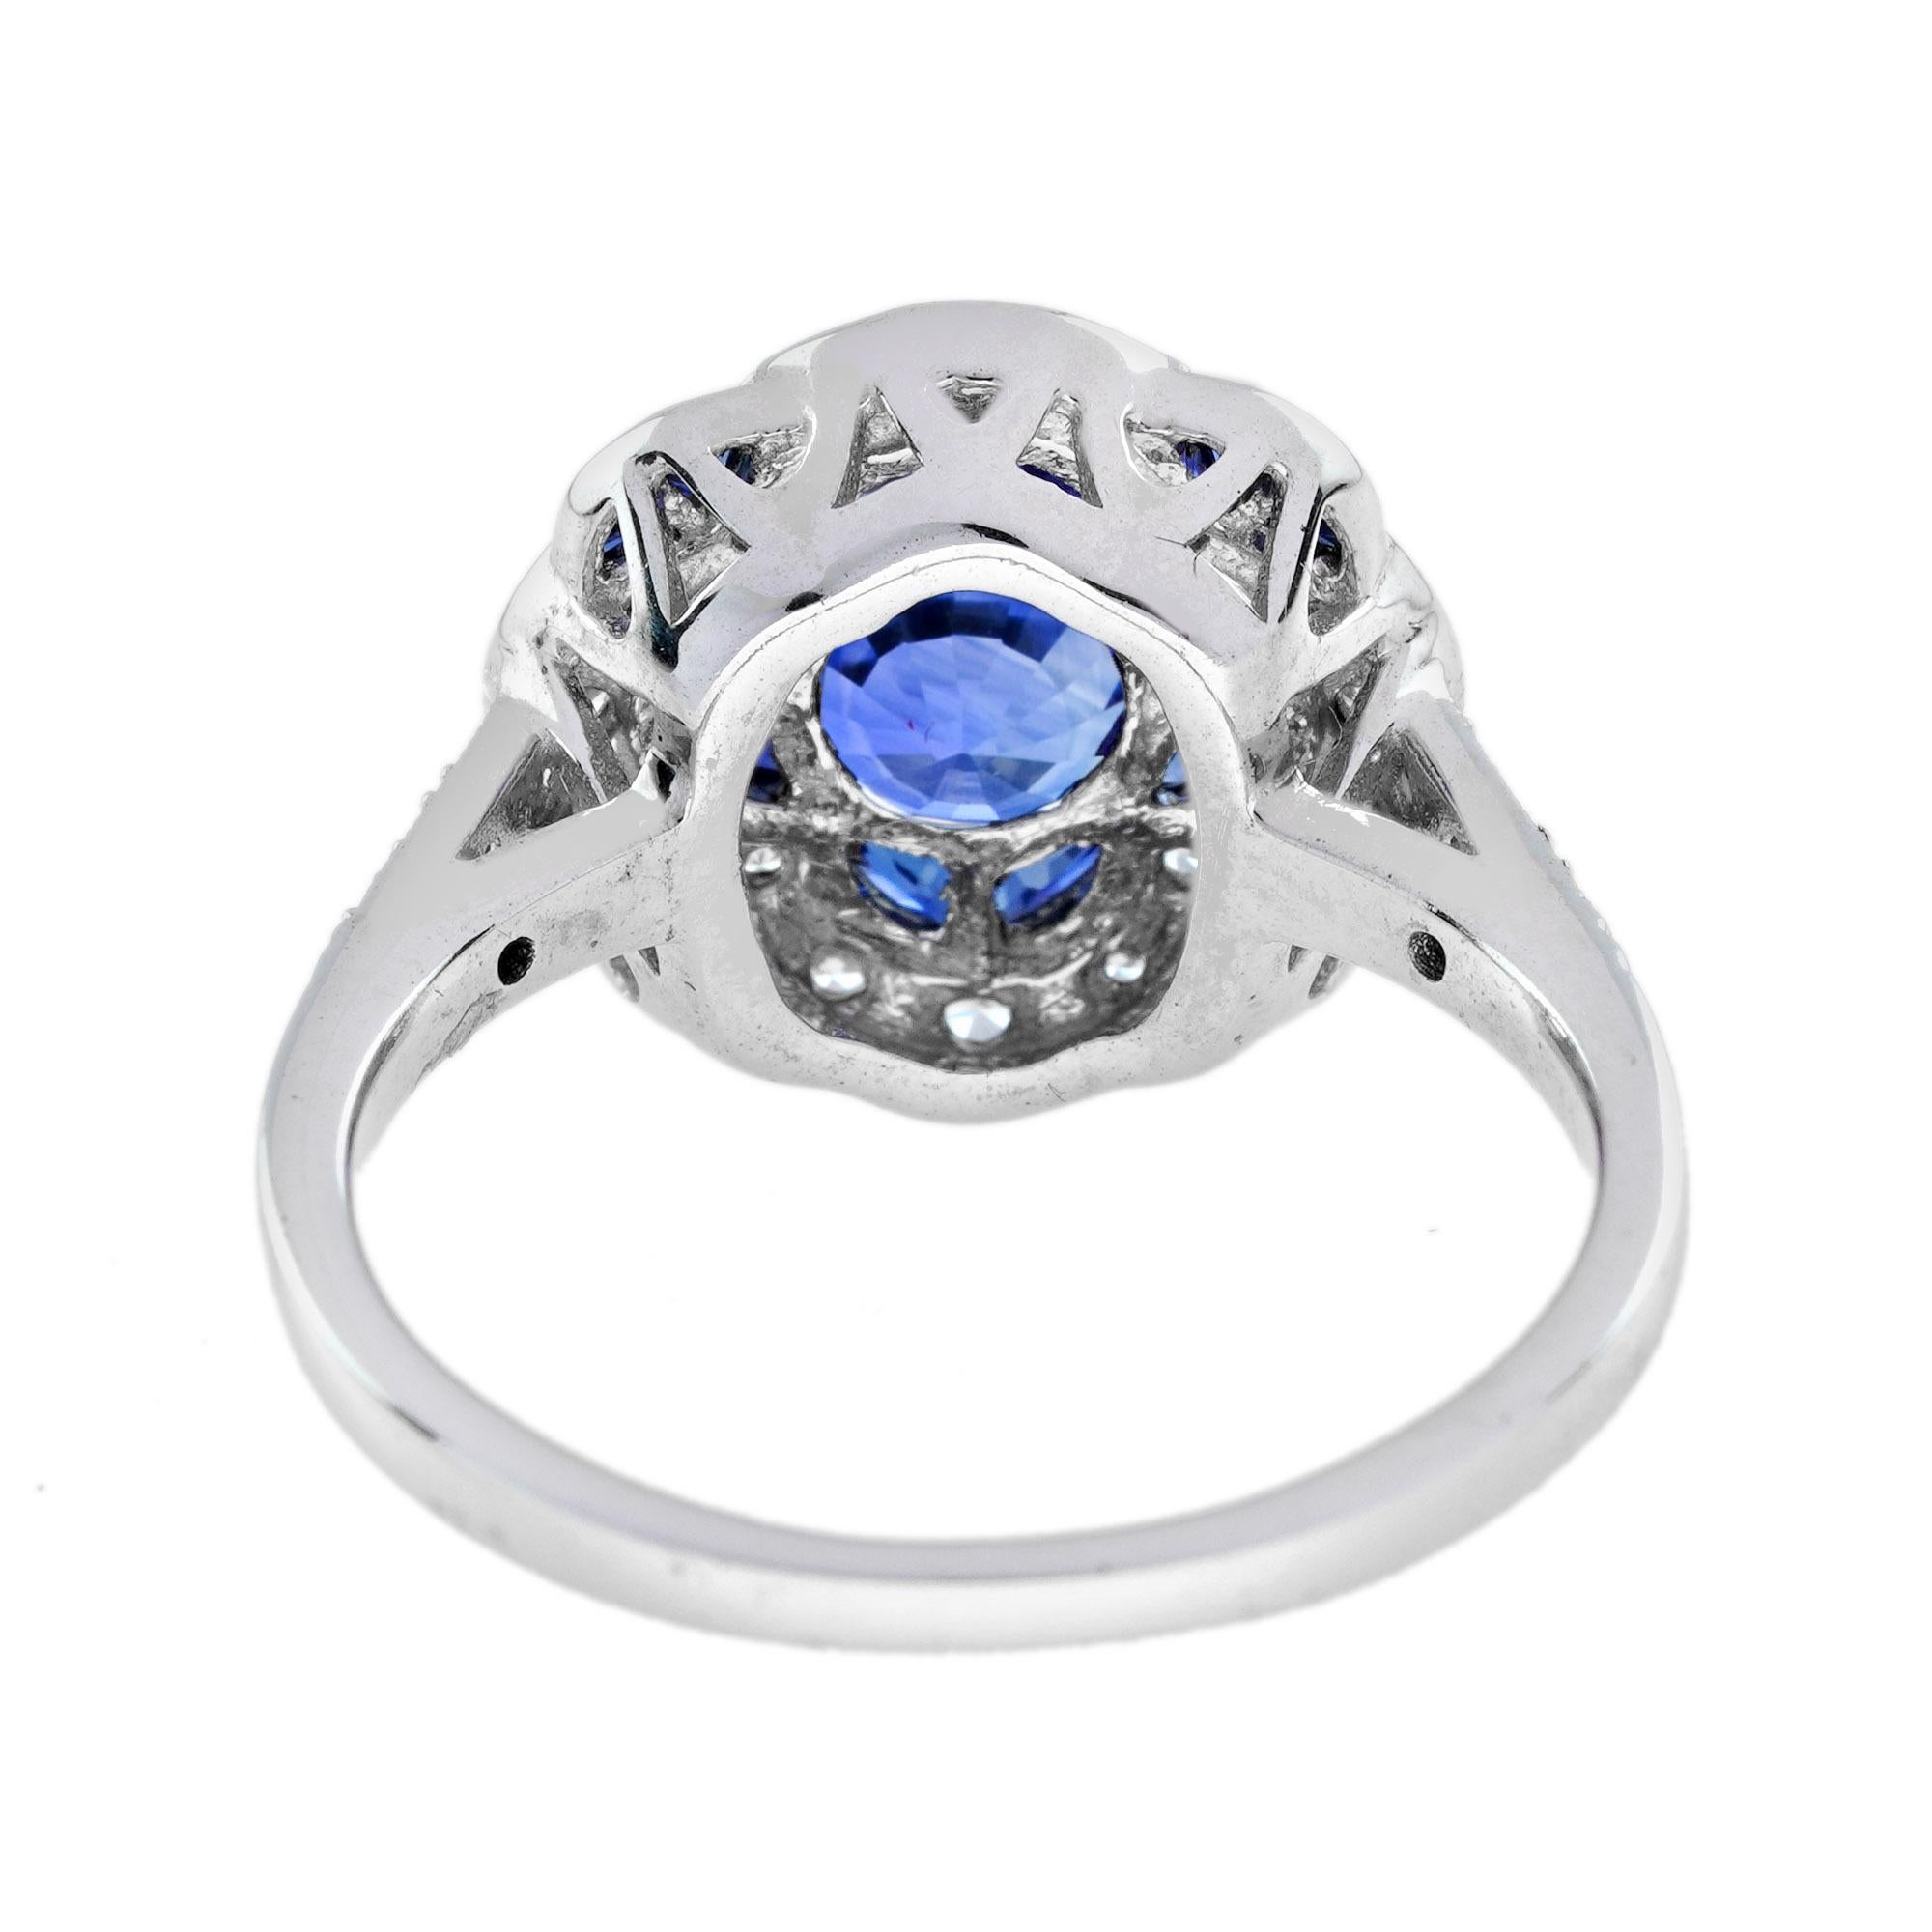 For Sale:  Ceylon Sapphire and Diamond Art Deco Style Floral Halo Ring in 18K White Gold 5